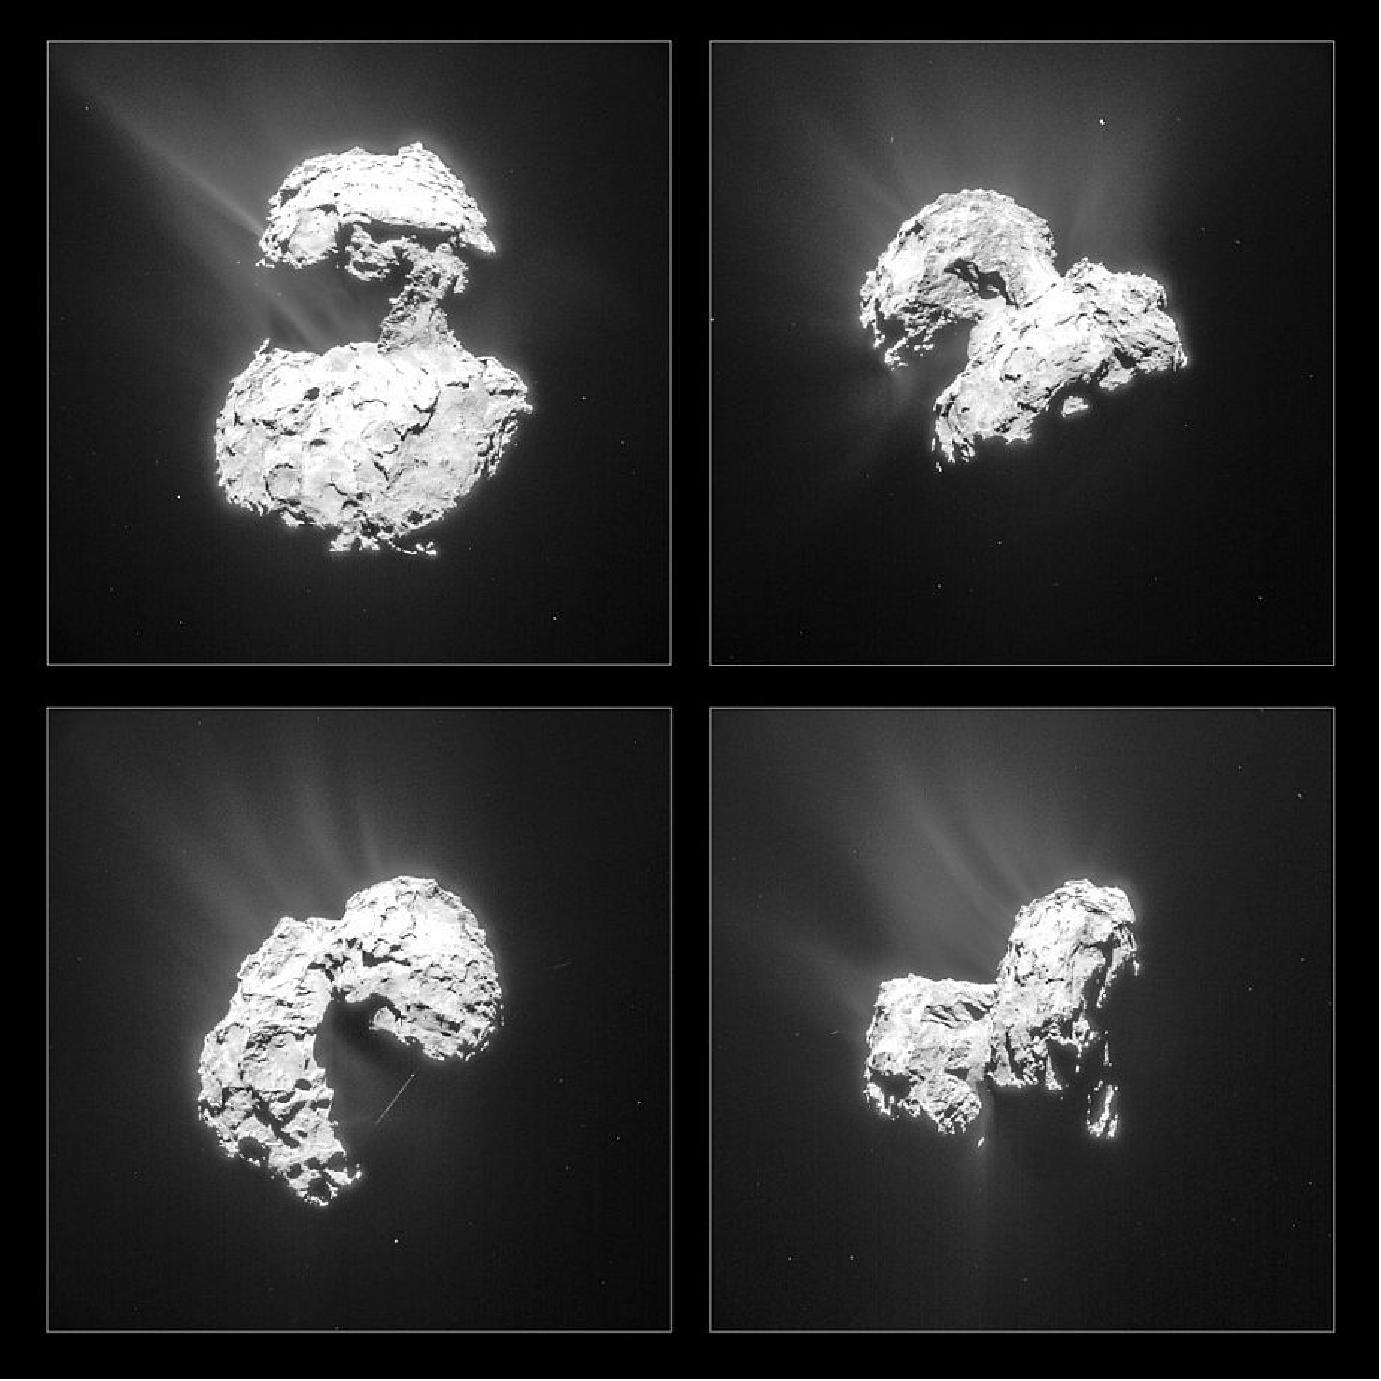 Figure 144: Montage of four single-frame images of Comet 67P/C-G taken by Rosetta’s Navigation Camera (NAVCAM) on Feb.25 (top left), Feb. 26, (top right) and the two bottom pictures on Feb. 27, 2015. The images have been processed to bring out the details of the comet’s activity. The exposure time for each image is 2 s (image credit: ESA/Rosetta/NAVCAM – CC BY-SA IGO 3.0)